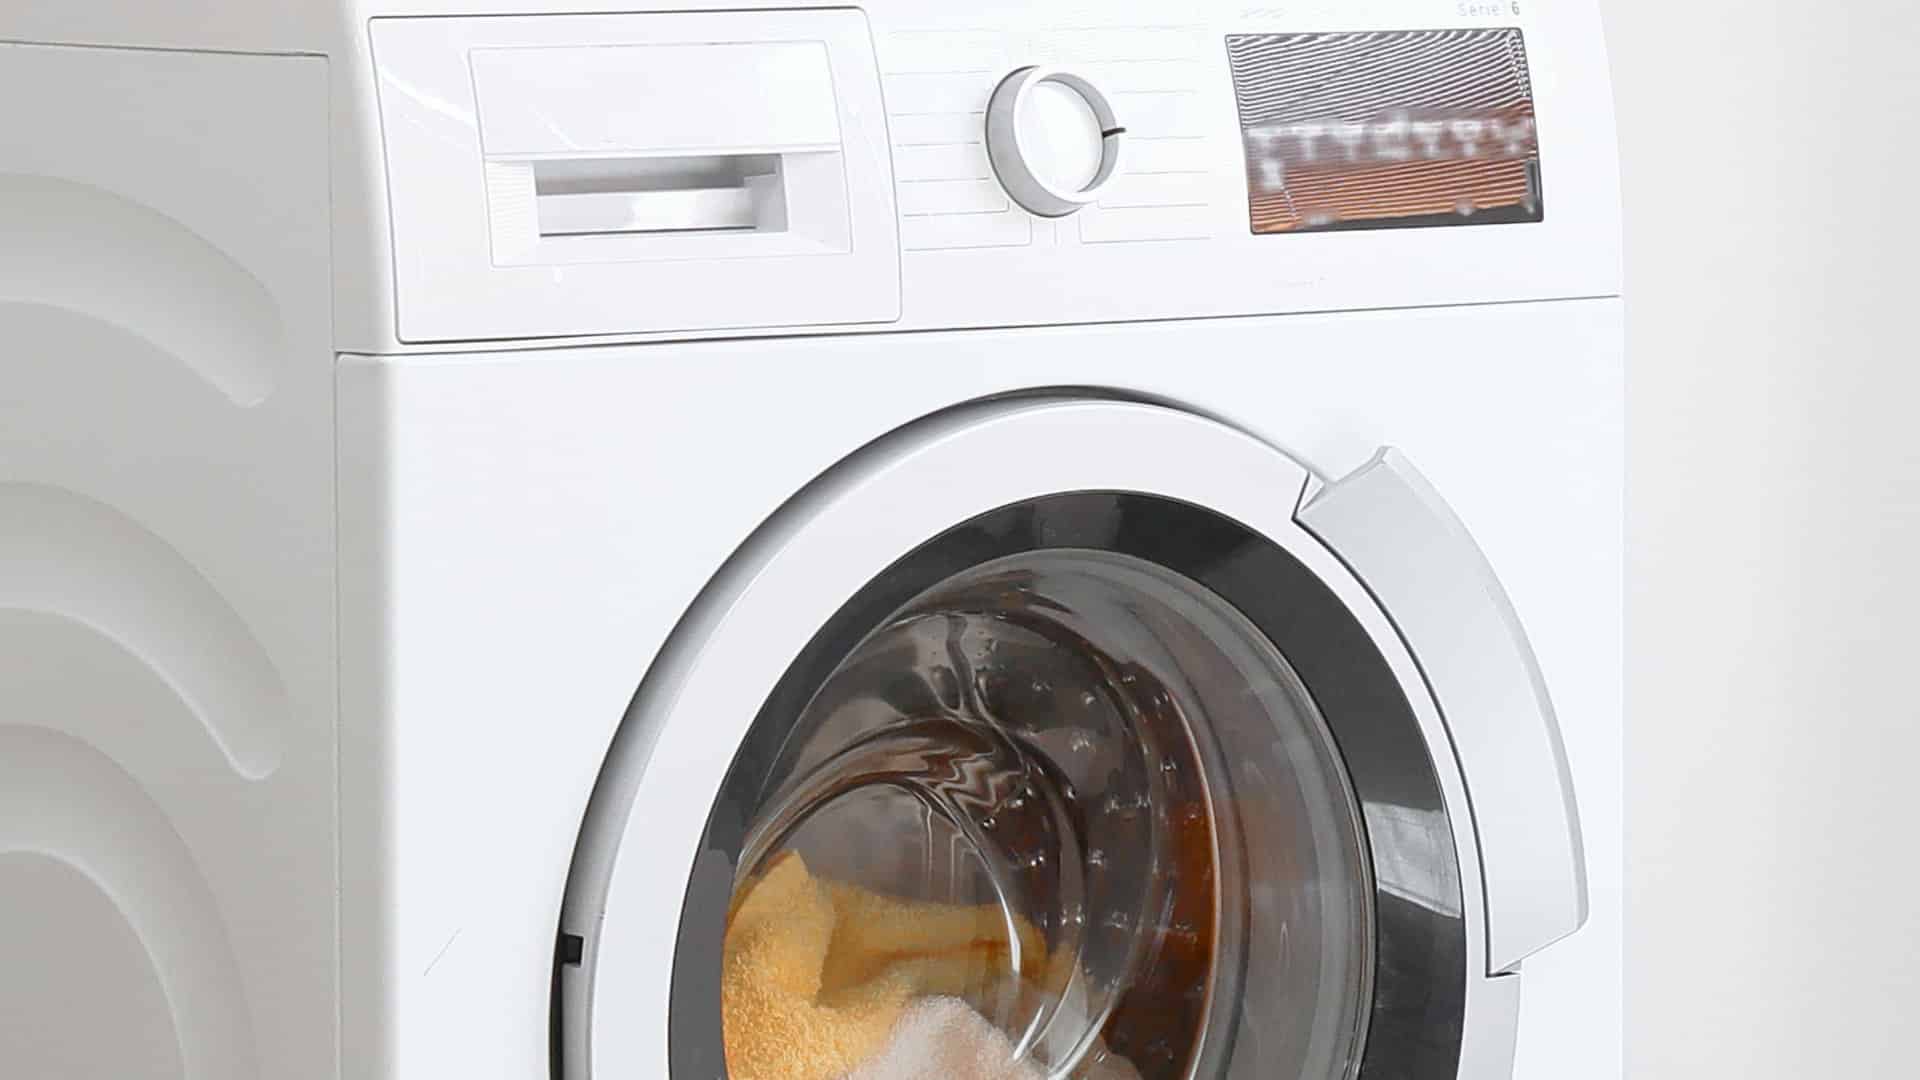 Featured image for “How To Deep Clean a Washing Machine”